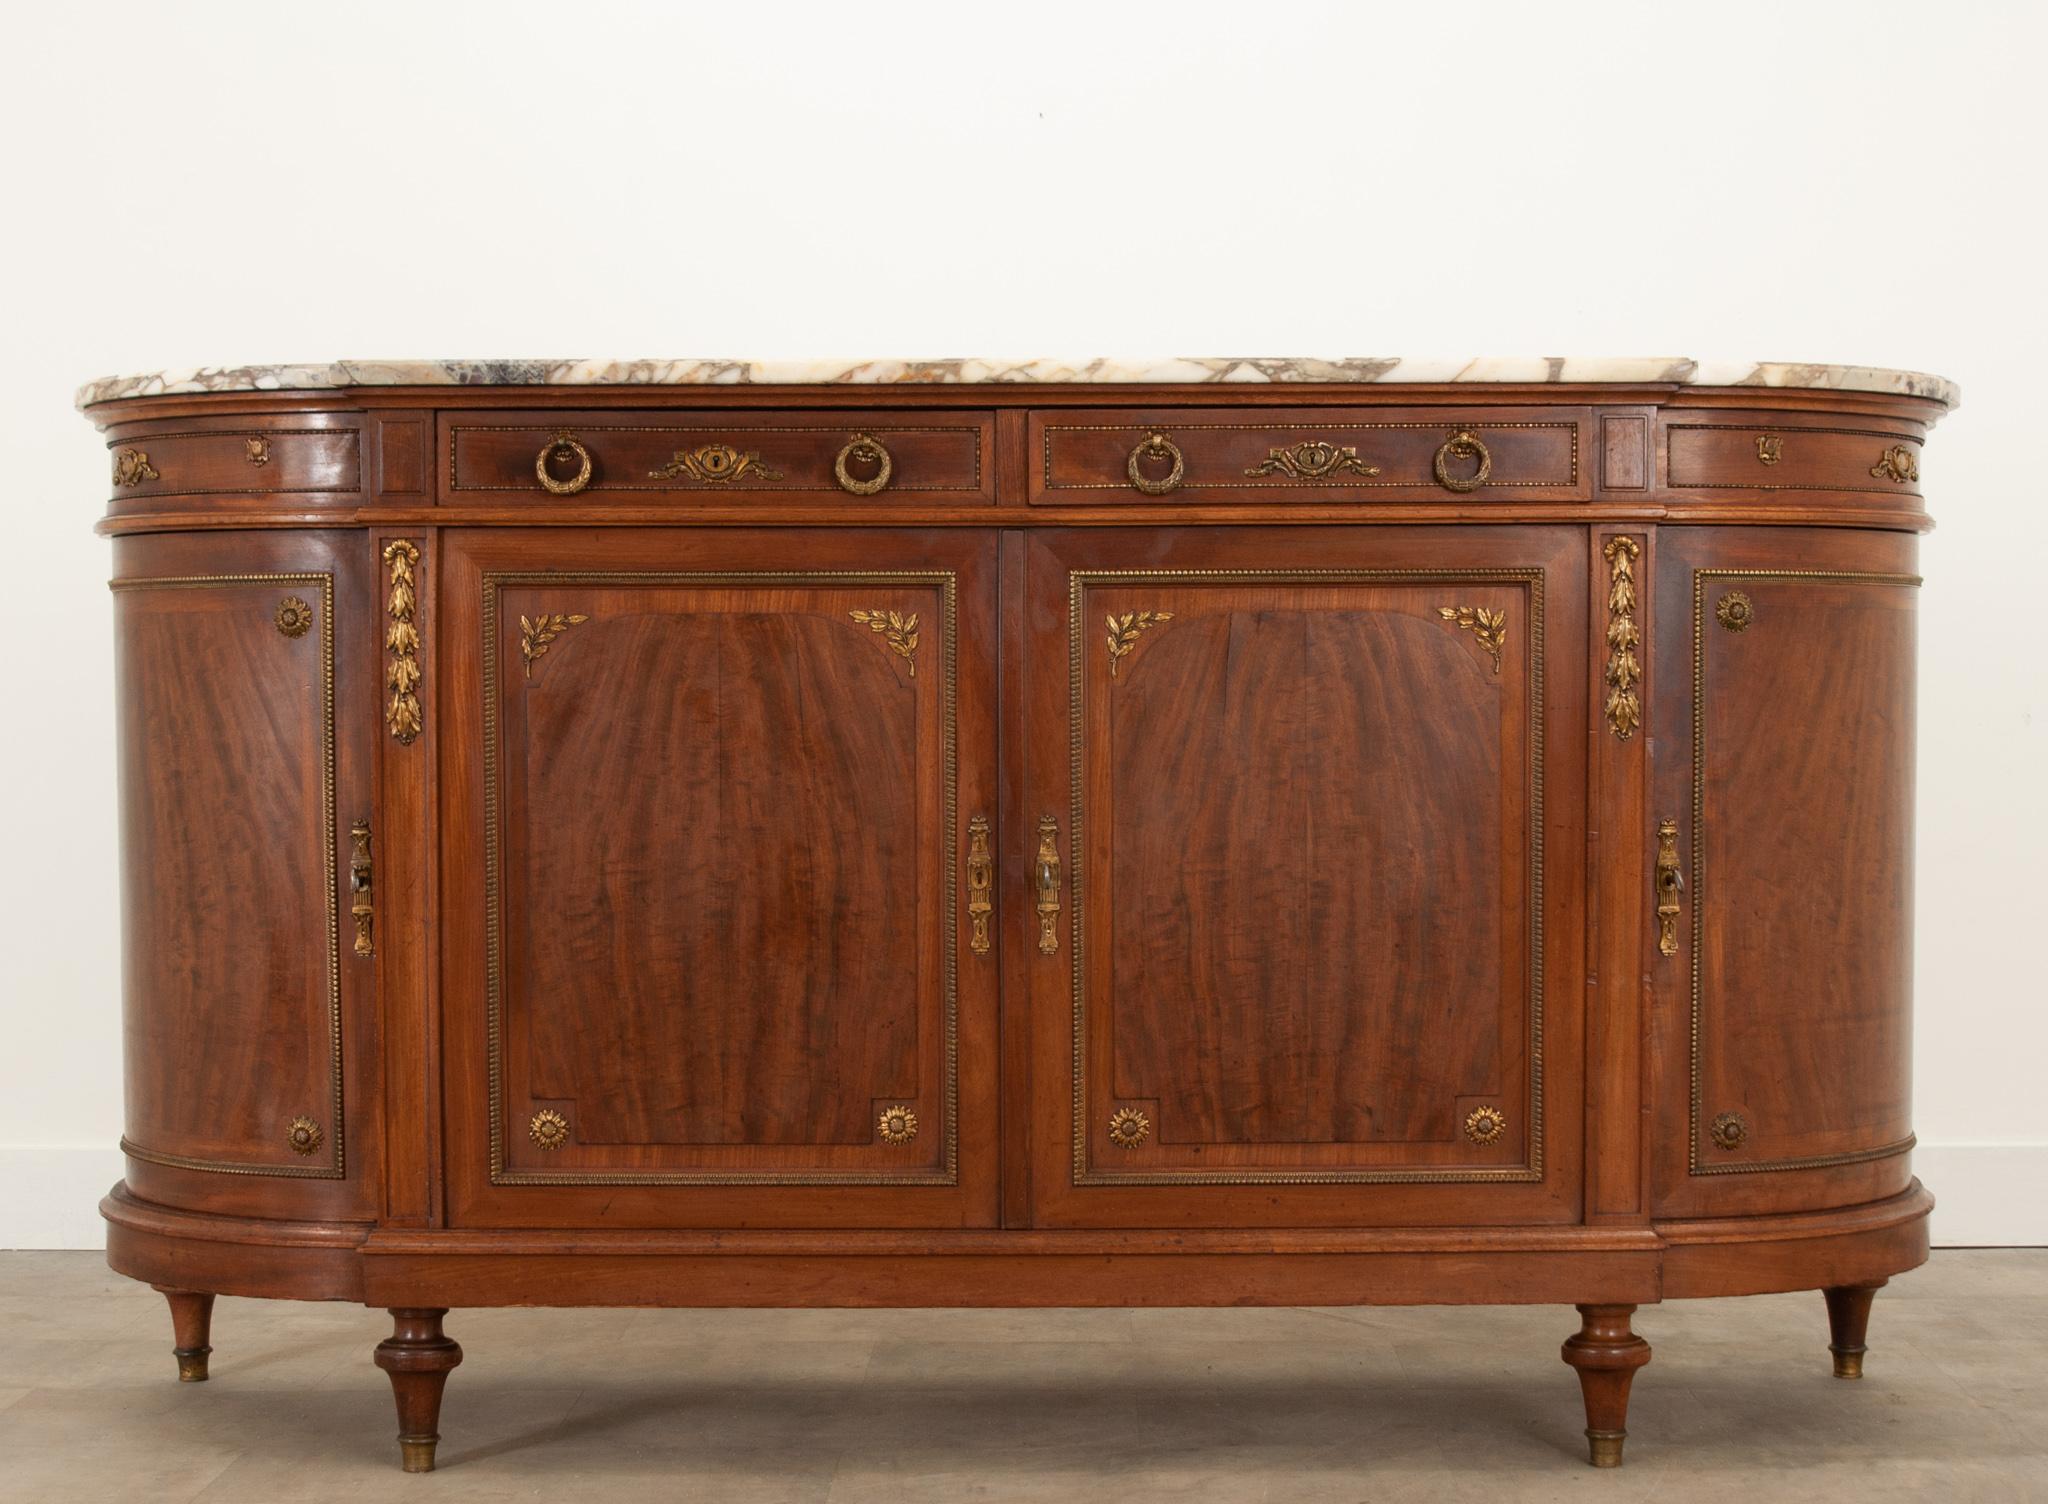 A striking demi lune enfilade from France, circa 1870, with a busy, shaped, multi-colored stone top and wonderful ormolu throughout. The apron houses two proper drawers and two rounded faux drawers. A pair of laurel wreath drop ring pulls open each